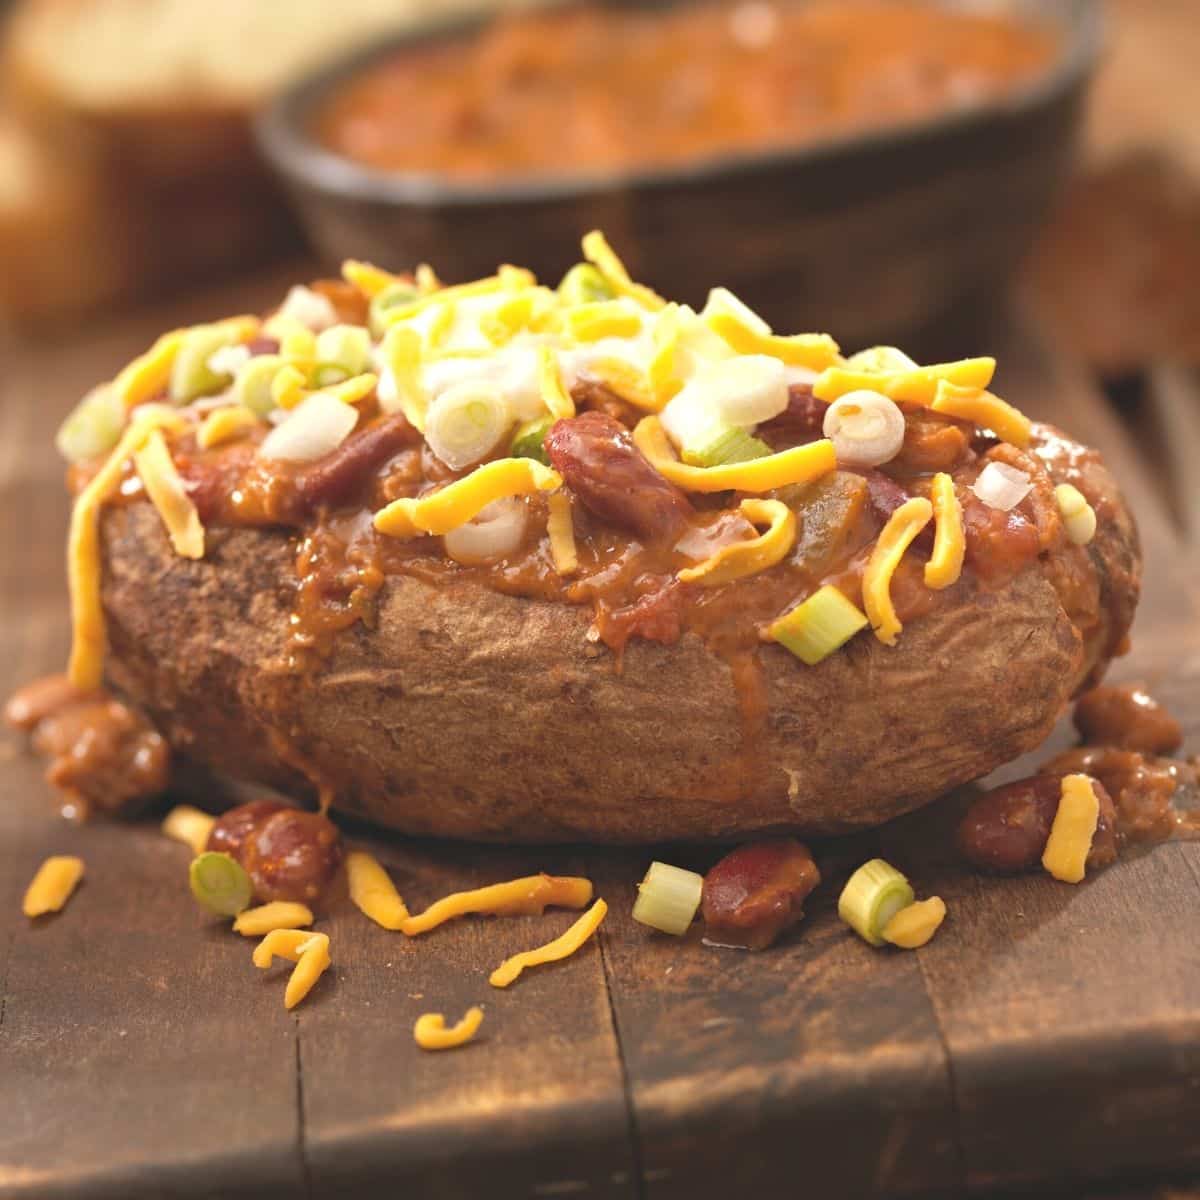 Chili Baked Potato - Baked Red Potatoes or Russets in Oven